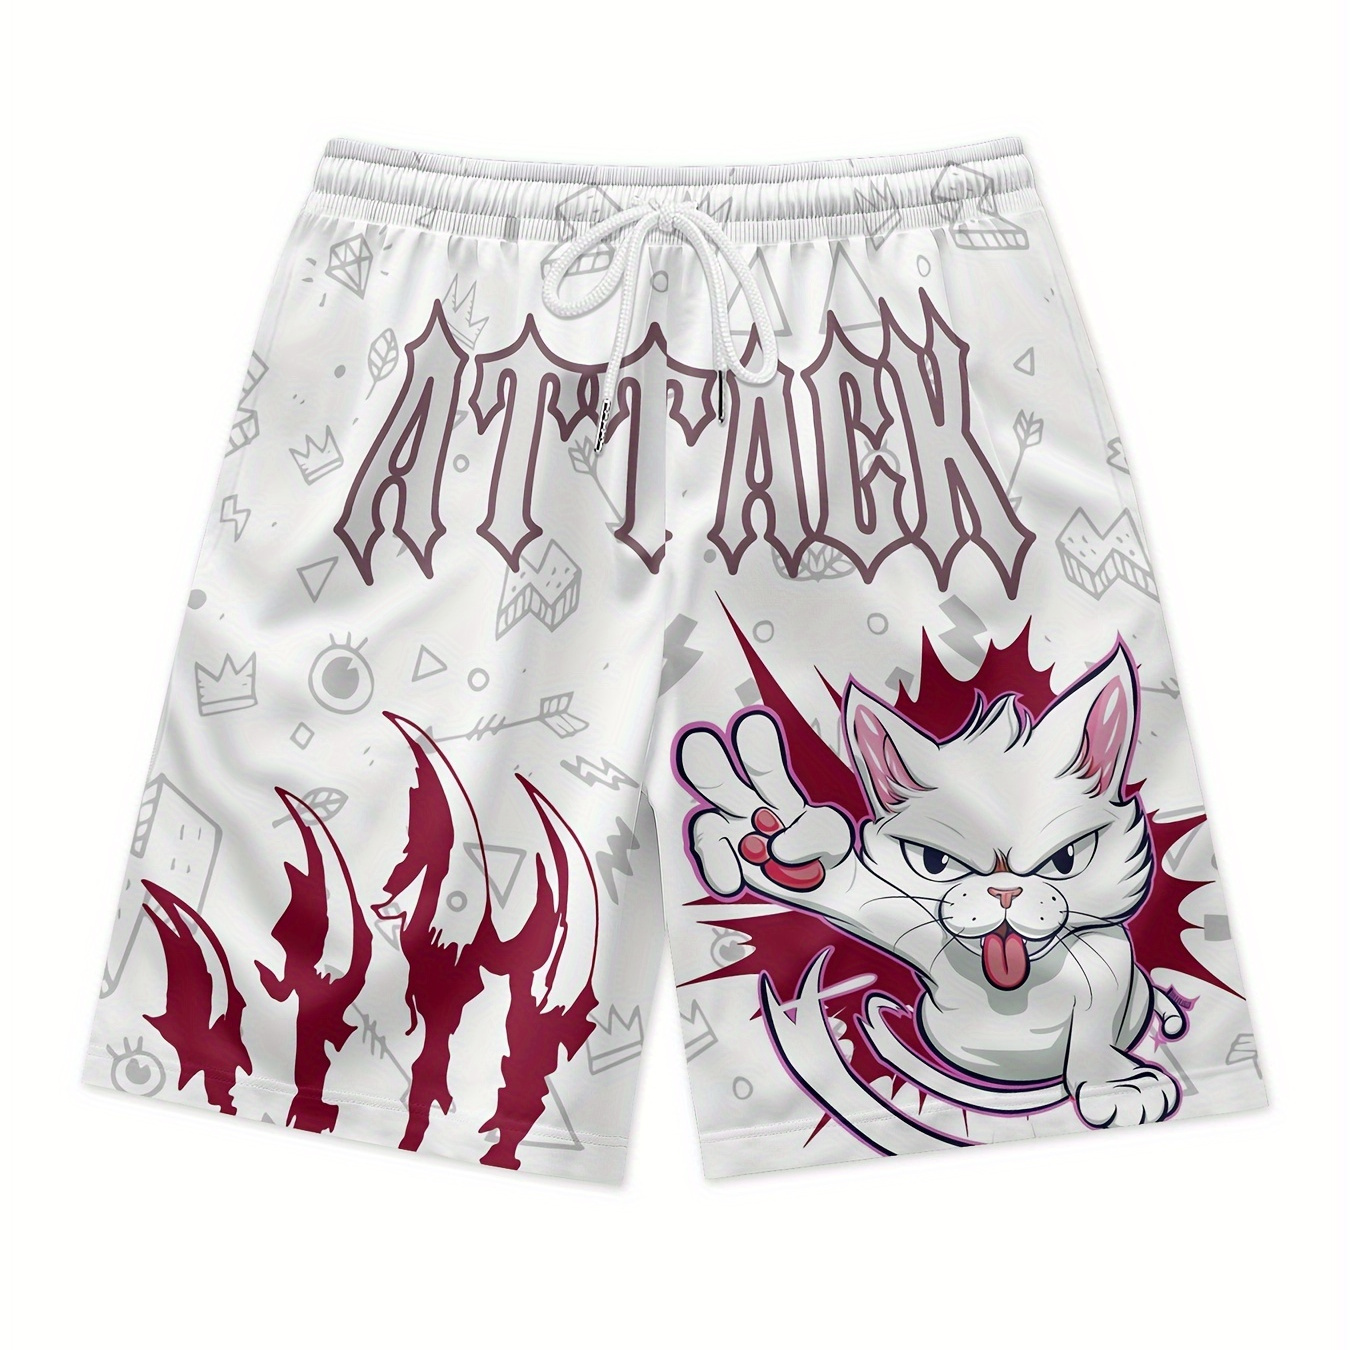 

Attack Cat Print White Waist Shorts For Men Quick Dry Breathable Polyester Beach Board Shorts Streetwear Shorts Clothing Bottoms